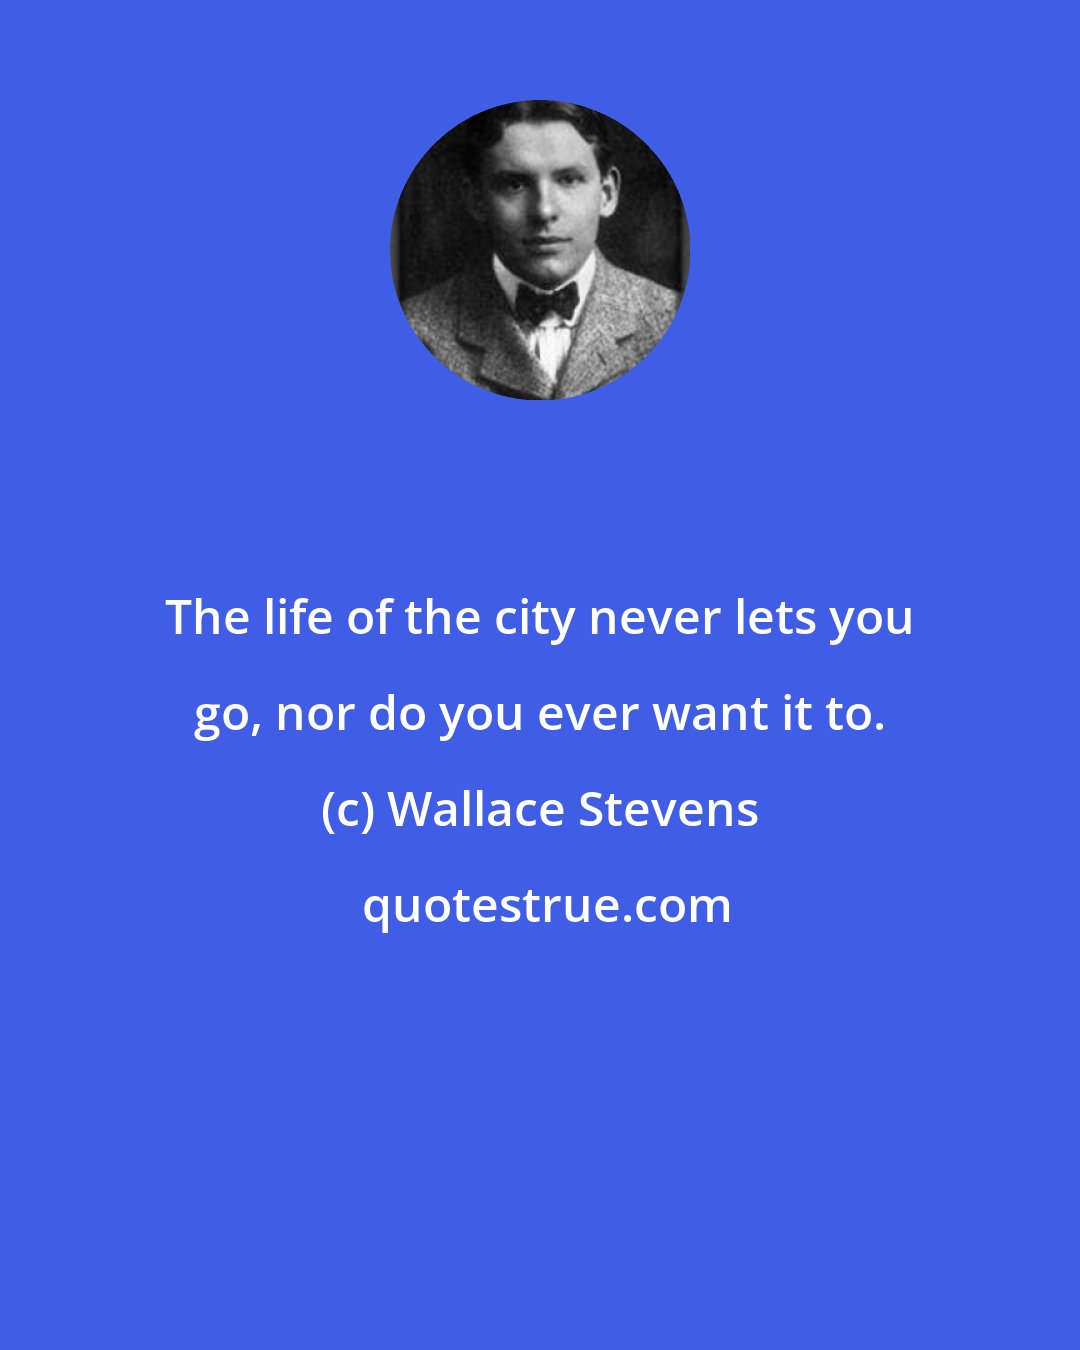 Wallace Stevens: The life of the city never lets you go, nor do you ever want it to.